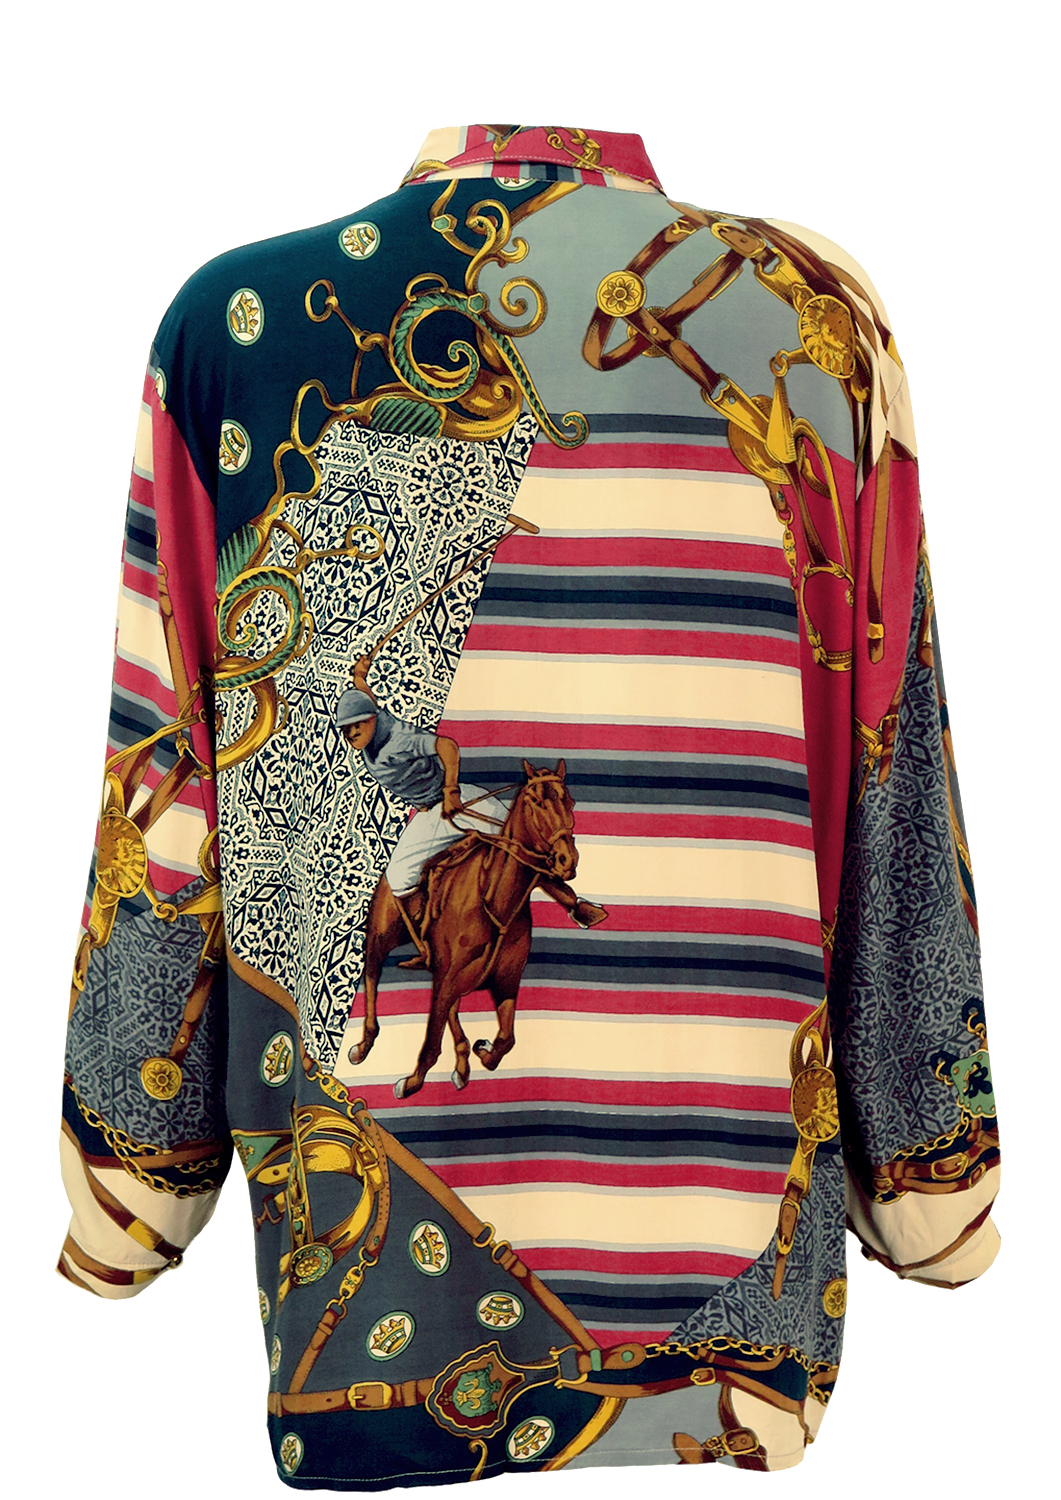 Long Sleeved Blouse with Equestrian/Polo Themed Pattern - L/XL | Reign ...